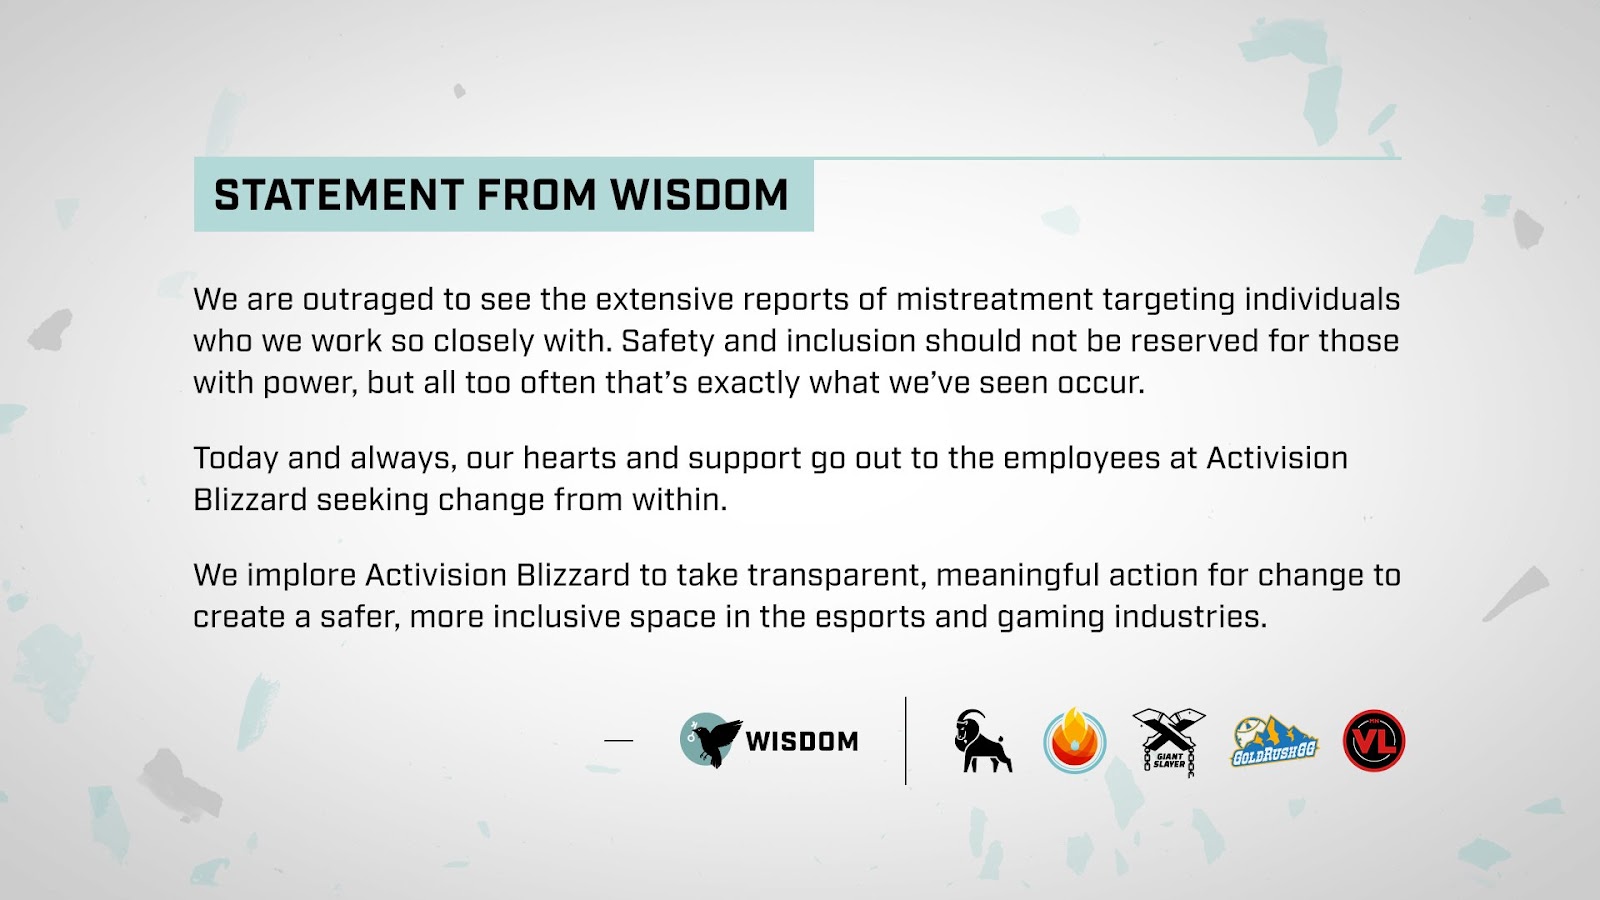 Statement from Wisdom

We are outraged to see the extensive reports of mistreatment targeting individuals who we work so closely with. Safety and inclusion should not be reserved for those with power, but all too often that’s exactly what we’ve seen occur.

Today and always, our hearts and support go out to the employees at Activision Blizzard seeking change from within.

We implore Activision Blizzard to take transparent, meaningful action for change to create a safer, more inclusive space in the esports and gaming industries.